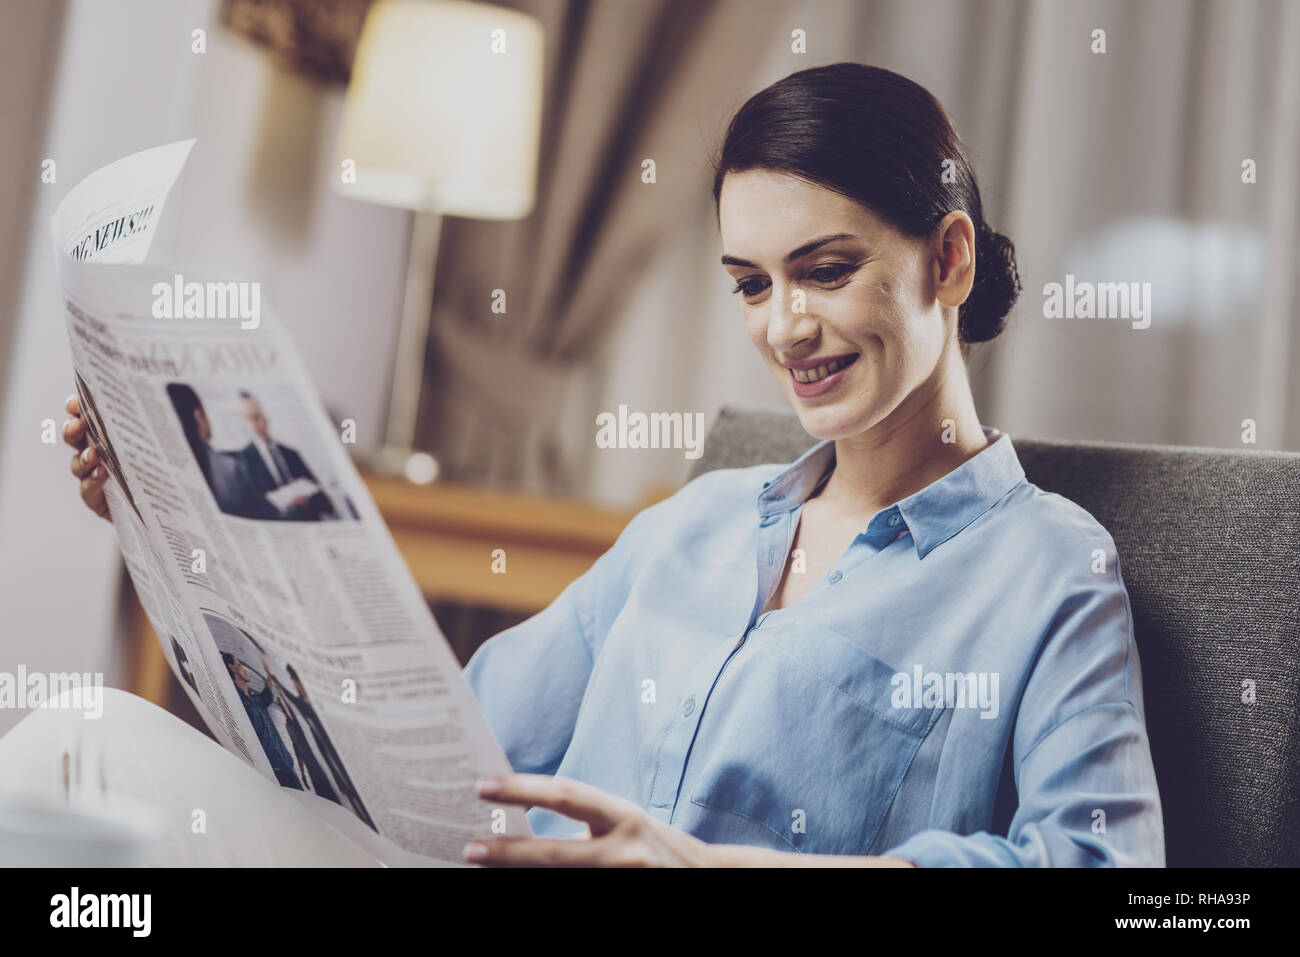 Positive woman reading news reports Stock Photo